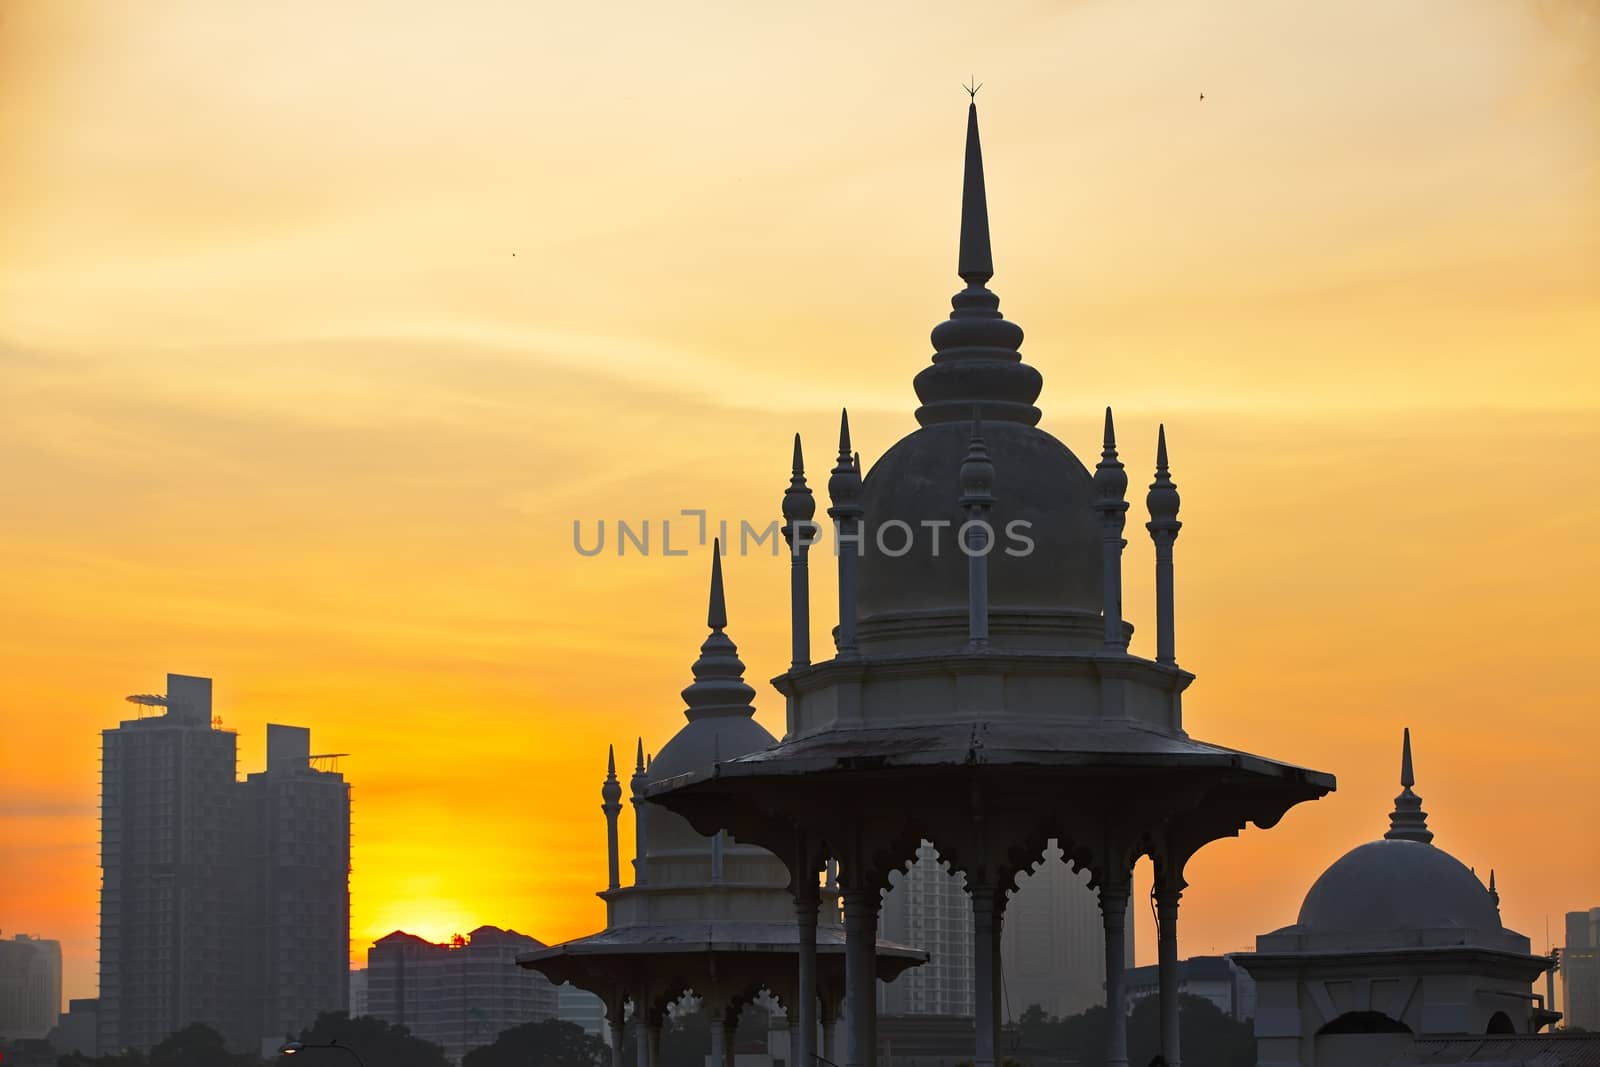 Towers of the historical building railway station in Kuala Lumpur at sunrise.